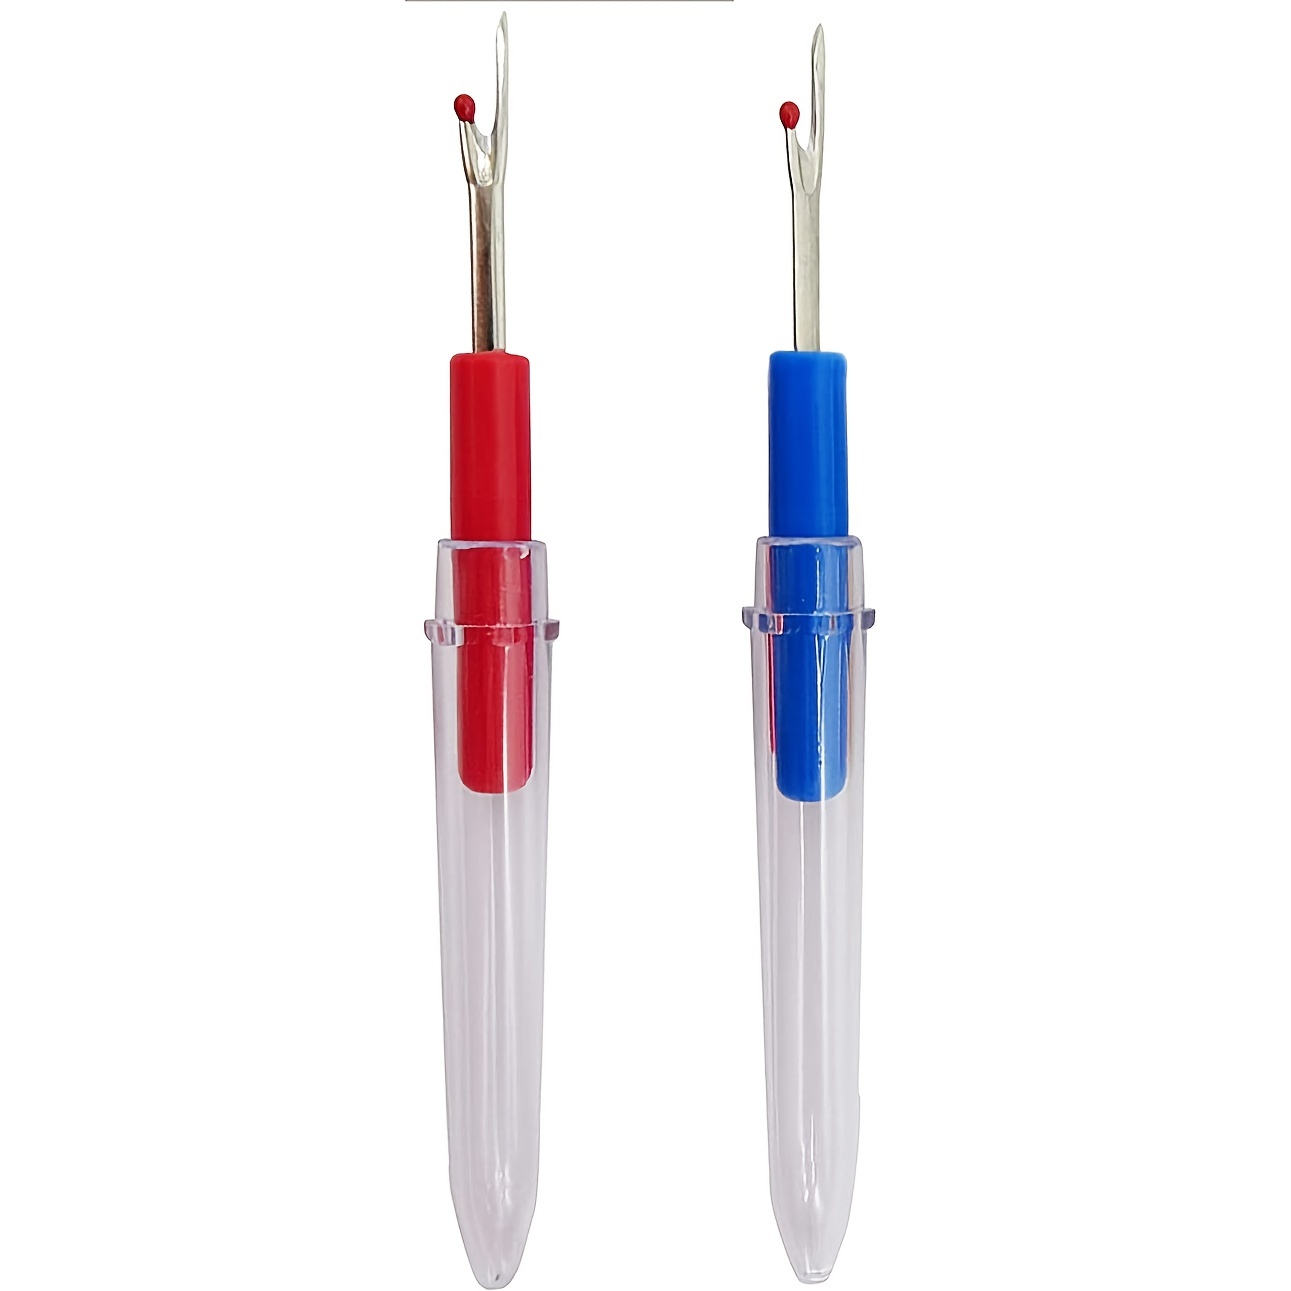 2PCS Seam Ripper Tools,Thread Remover Kit for Sewing/Crafting